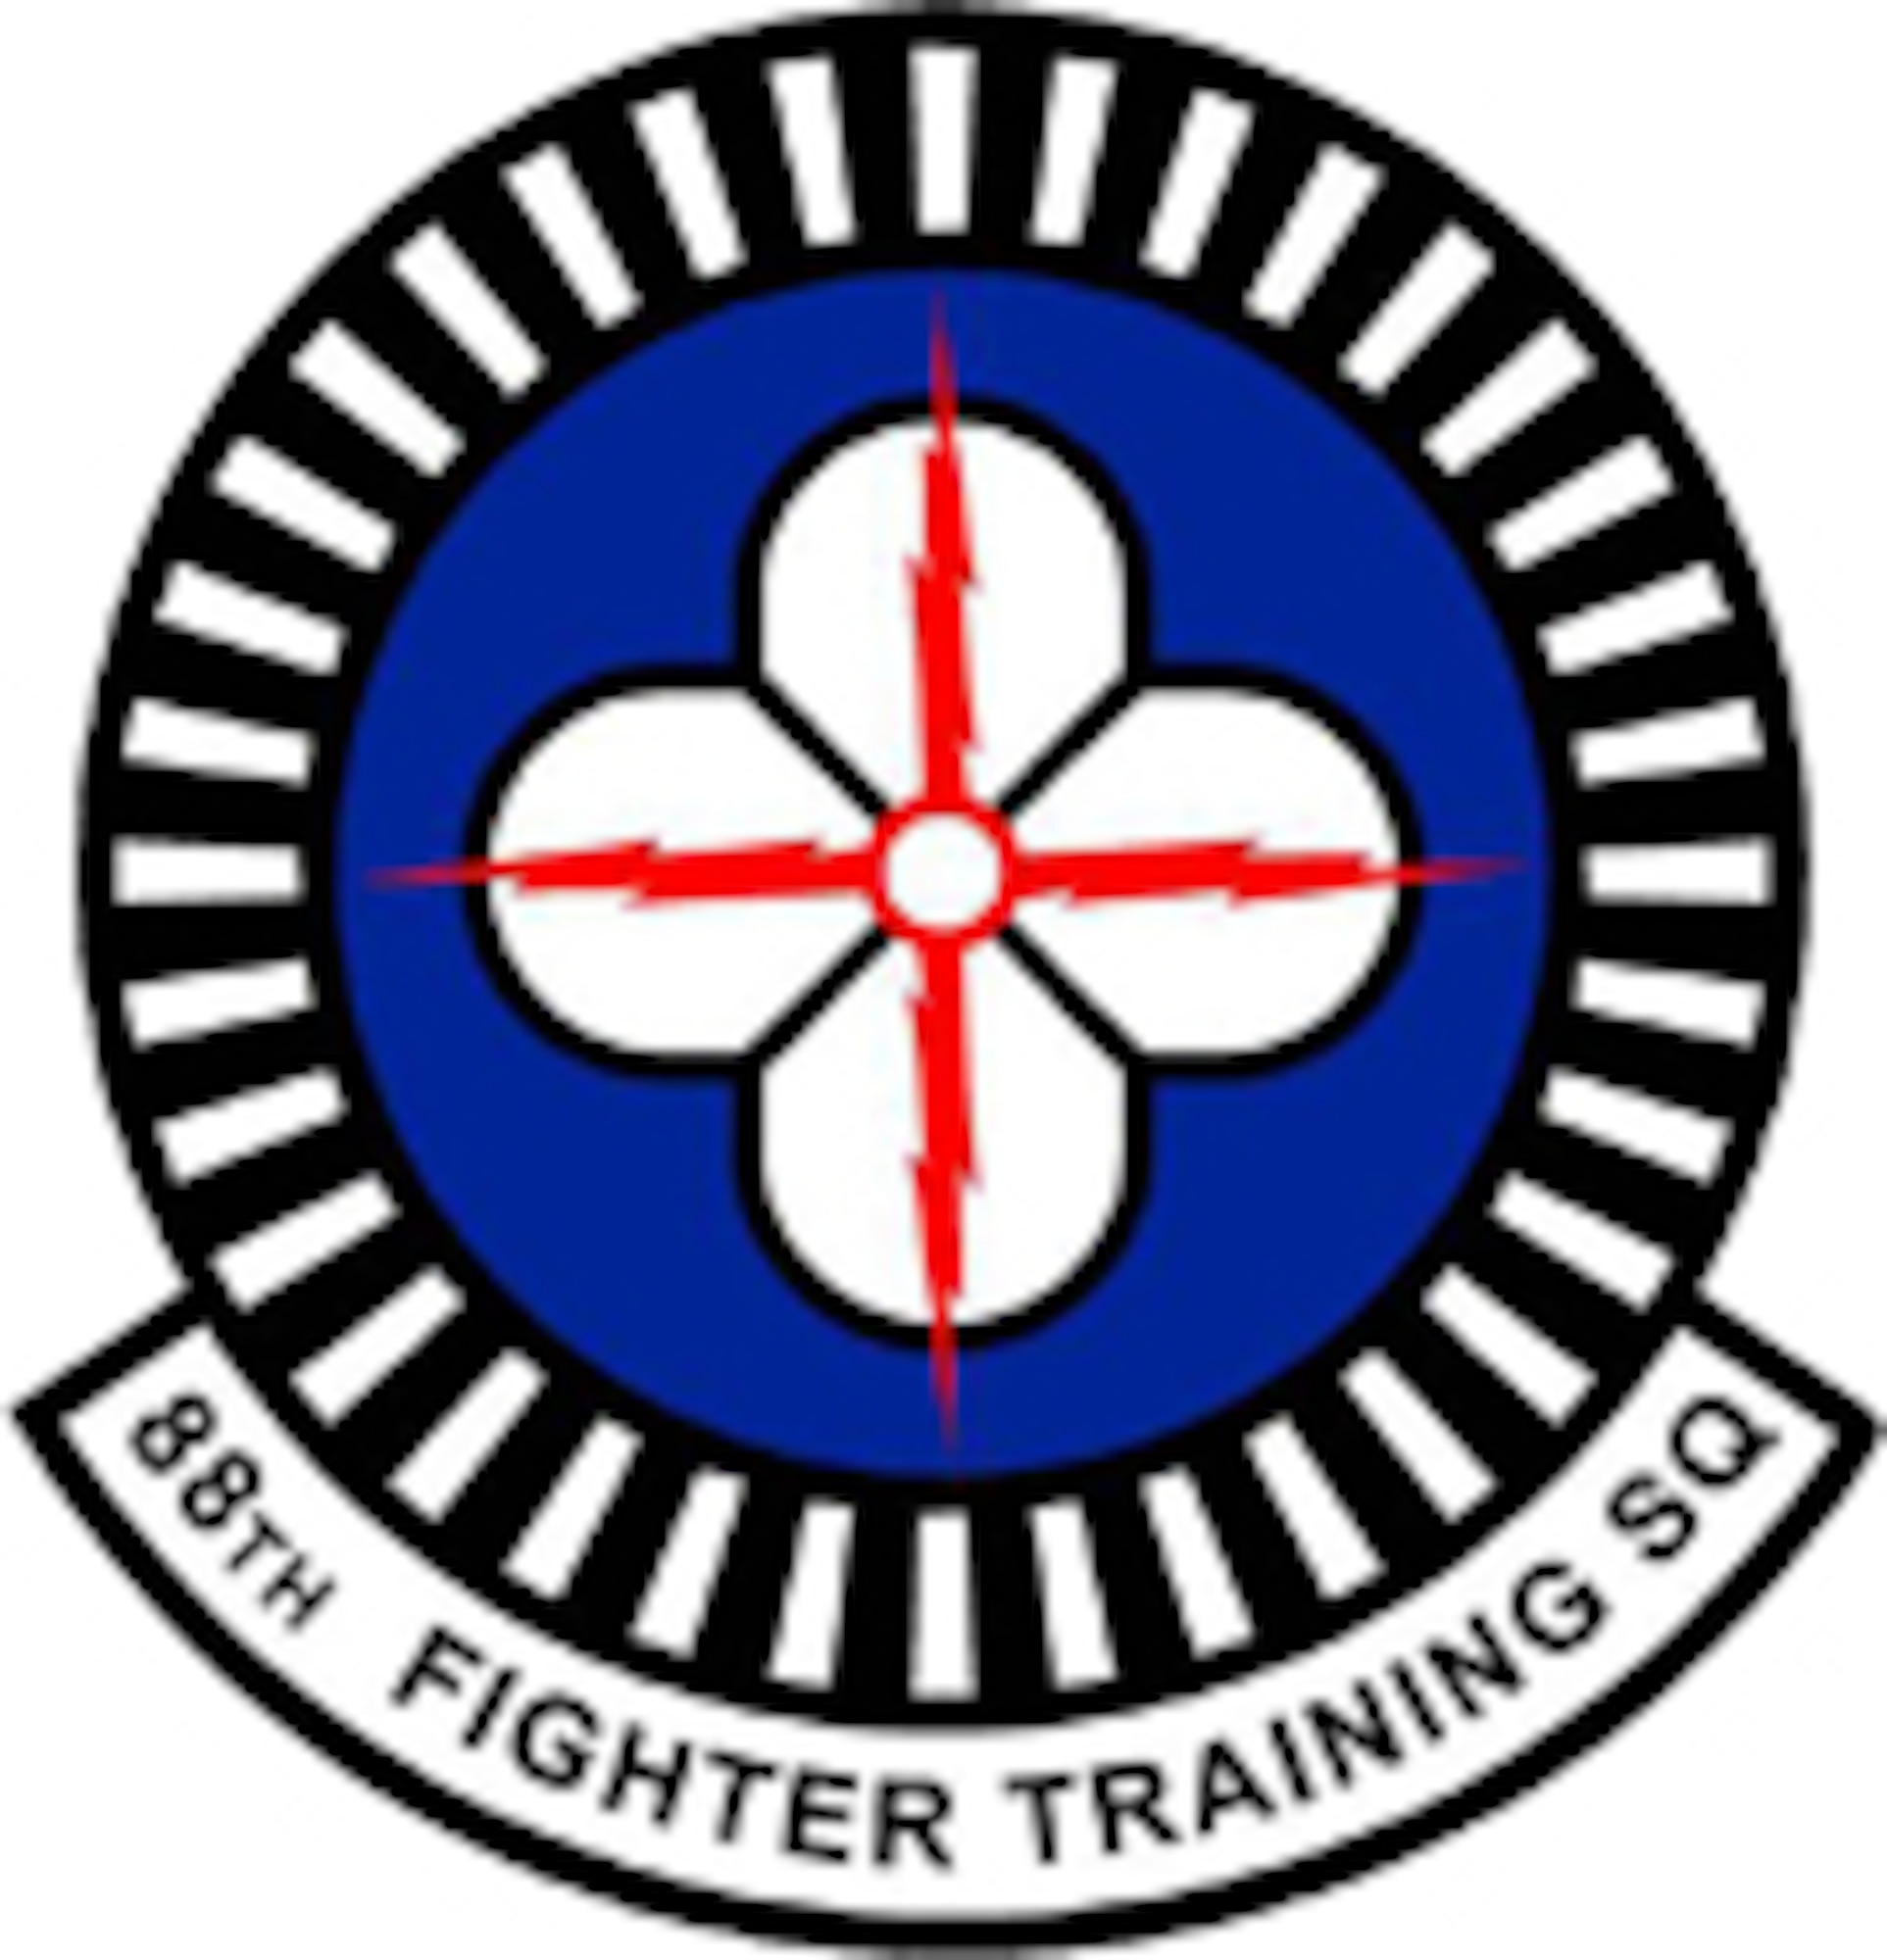 88th Fighter Training Squadron